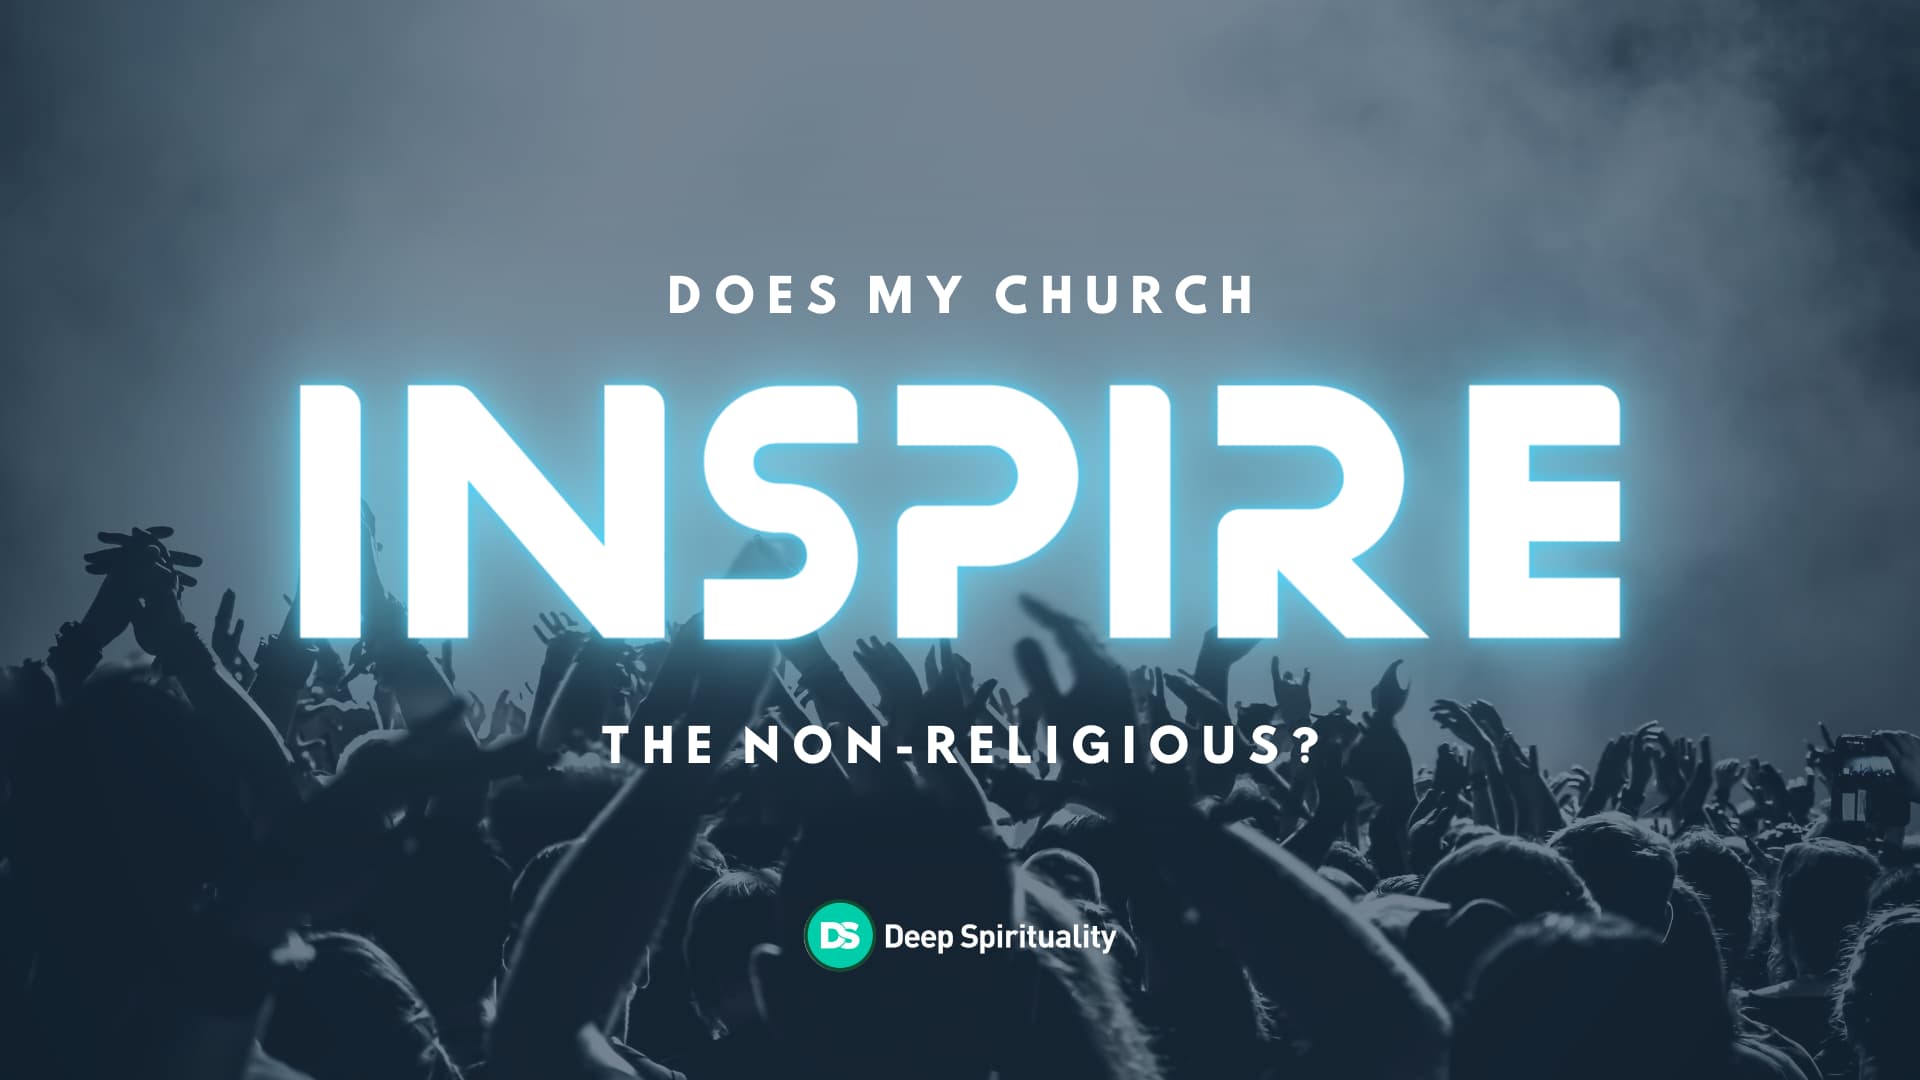 Does My Church Inspire the Non-Religious? 1